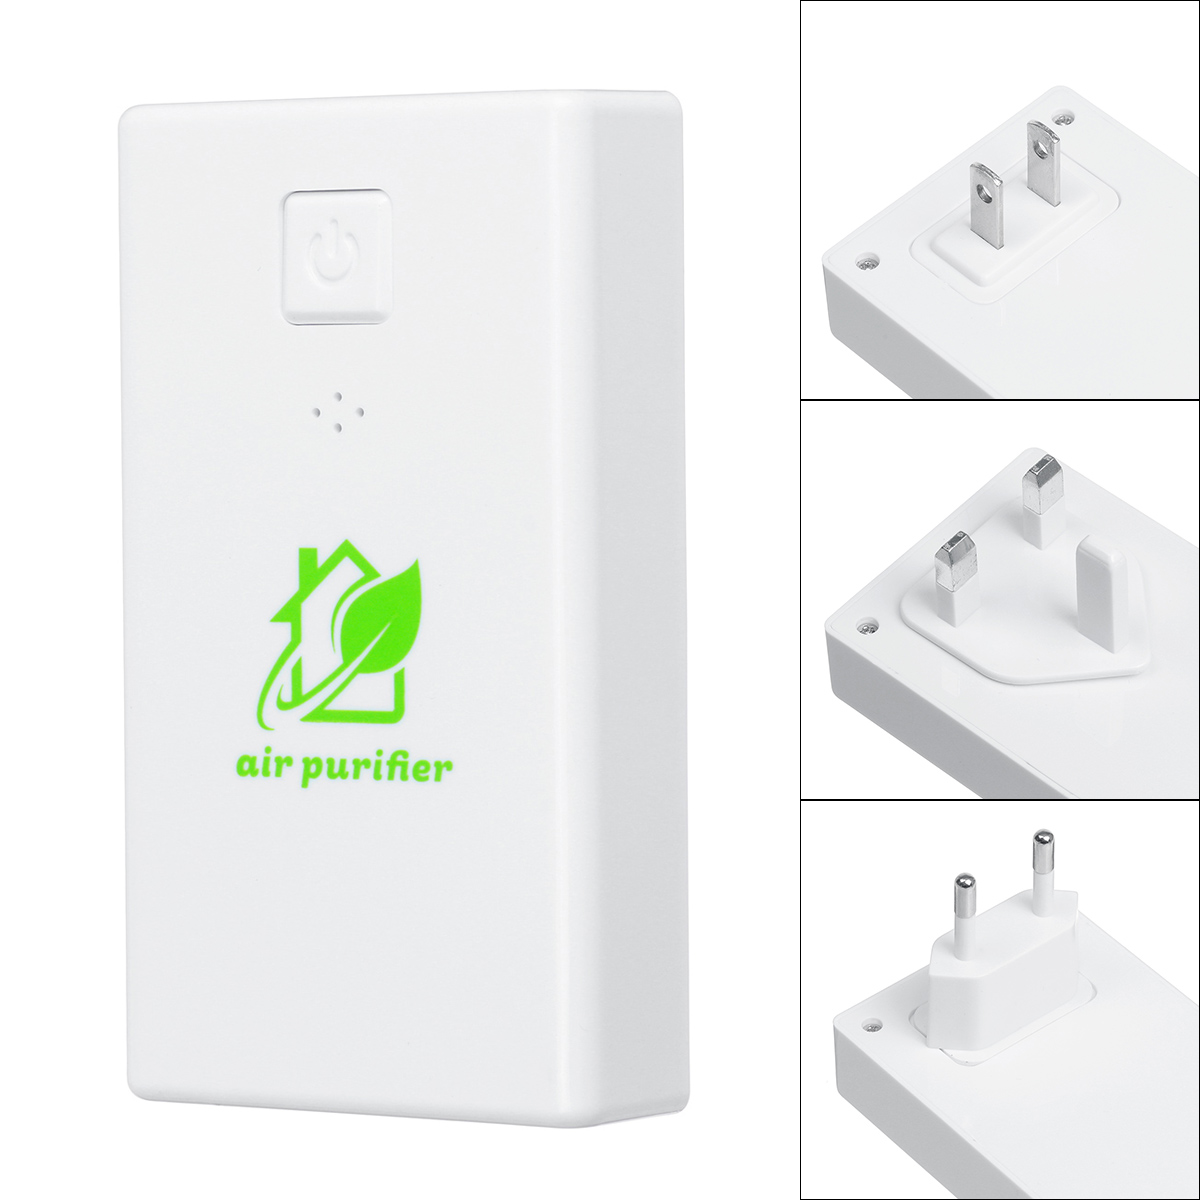 Portable-Plug-in-Air-Purifier-Negative-Ion-Air-Purification-Remove-Formaldehyde-Dust-Eliminate-Odor--1835239-9